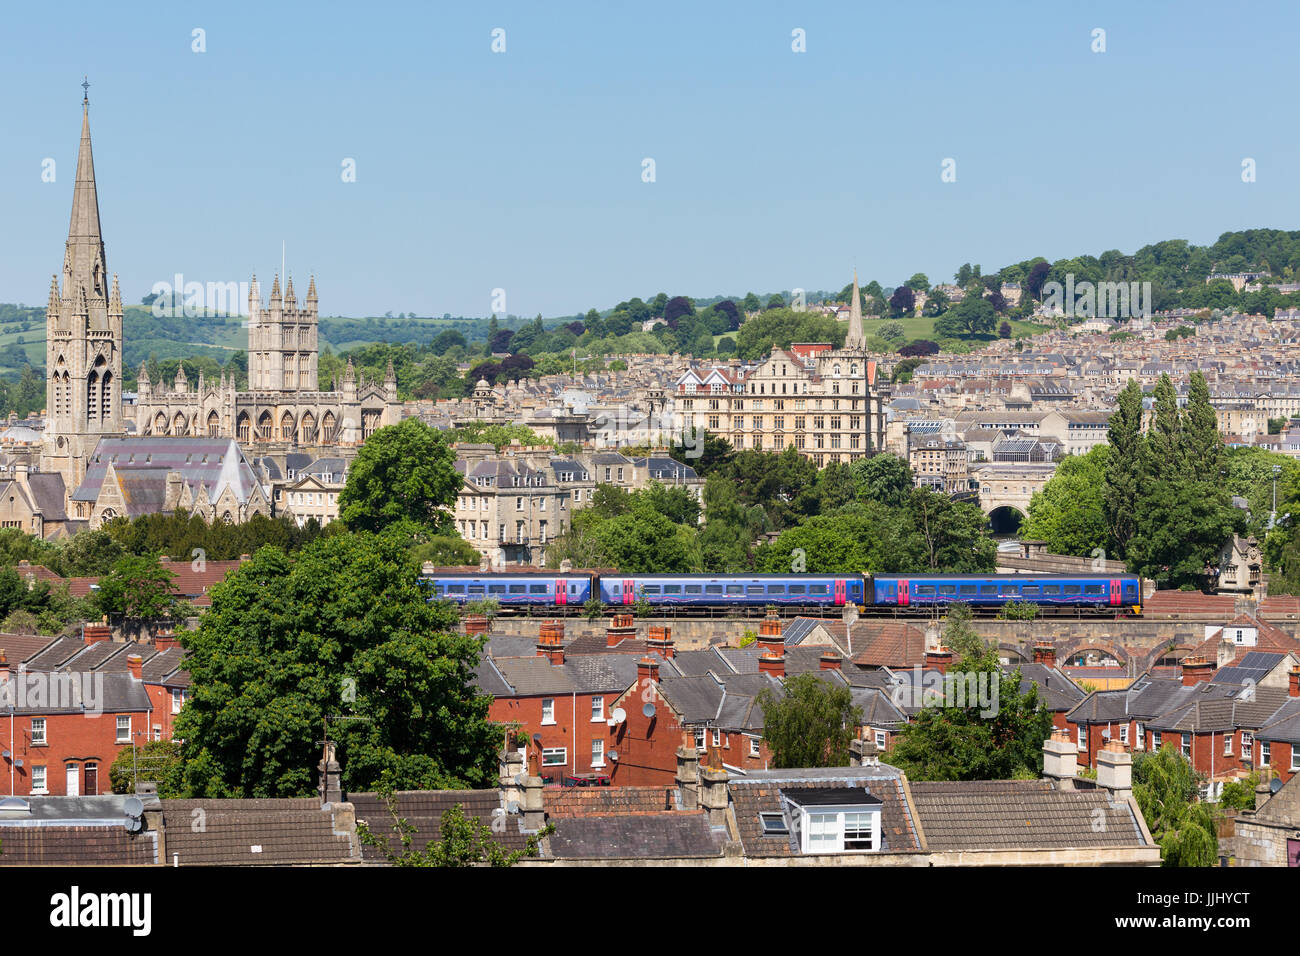 BATH, UK - MAY 26, 2017: Long shot of the City of Bath with a Great Western Train passing through the bottom of the frame. Stock Photo